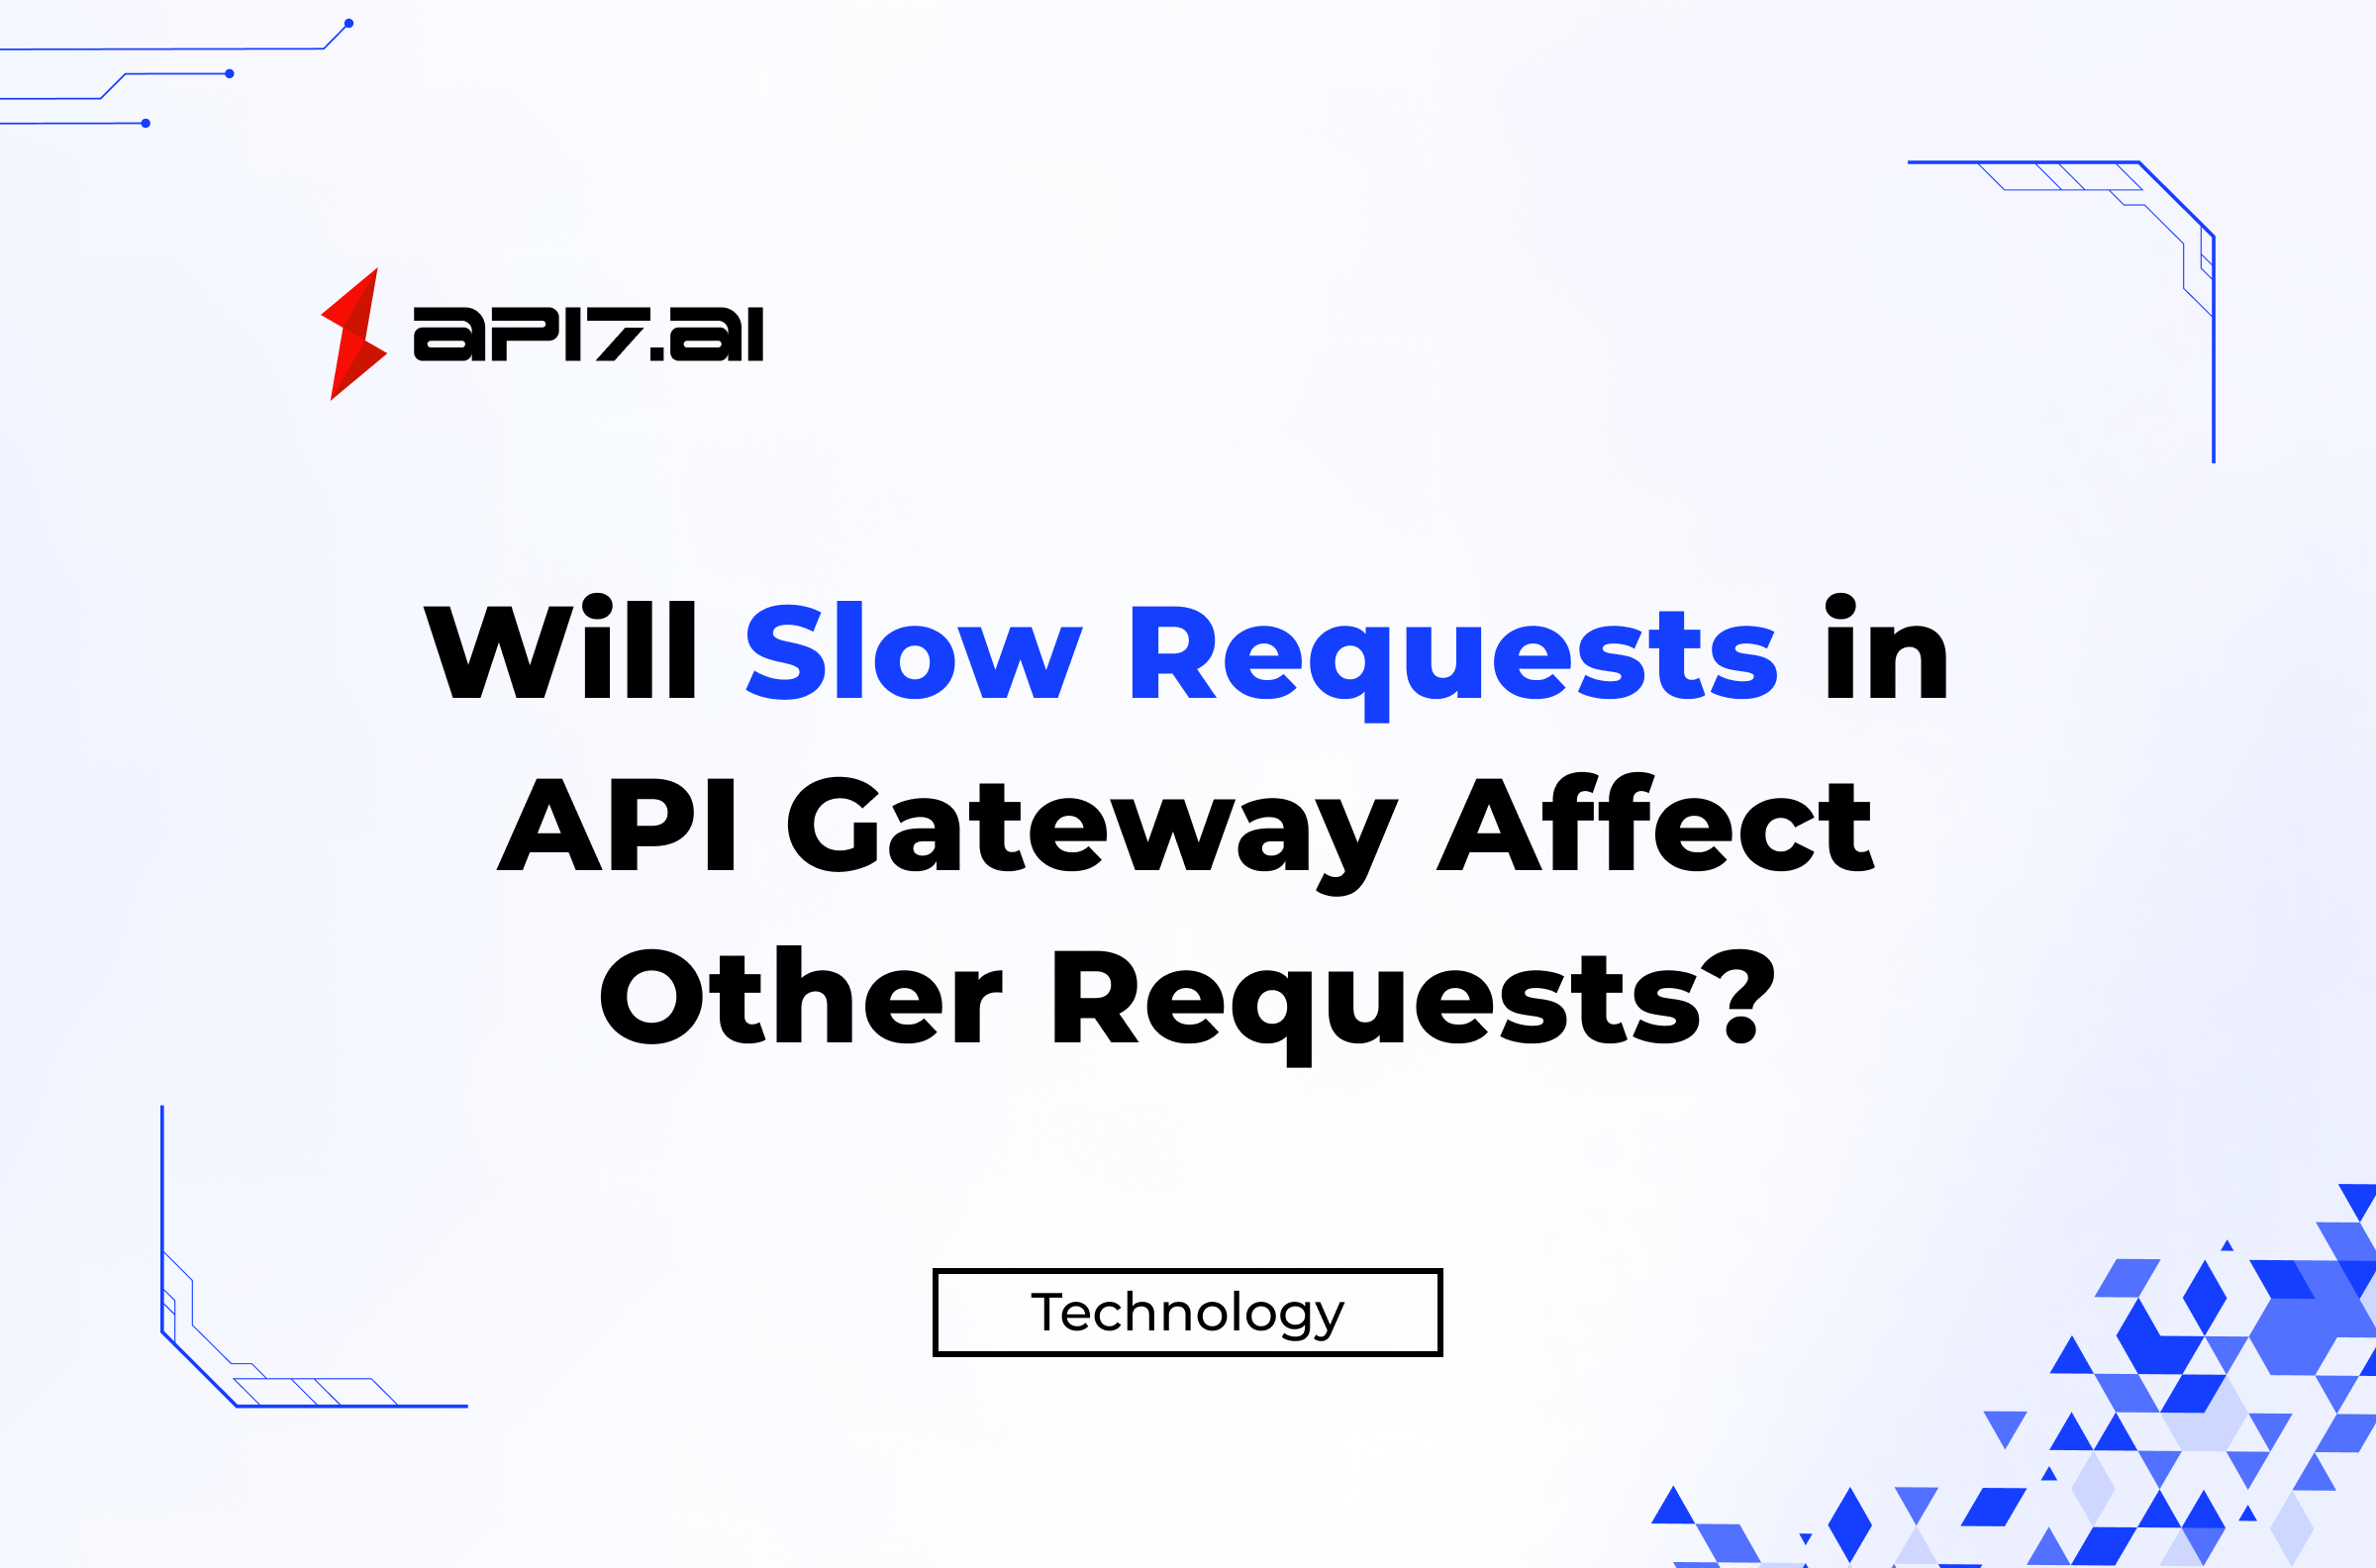 Will Slow Requests in API Gateway Affect Other Requests?